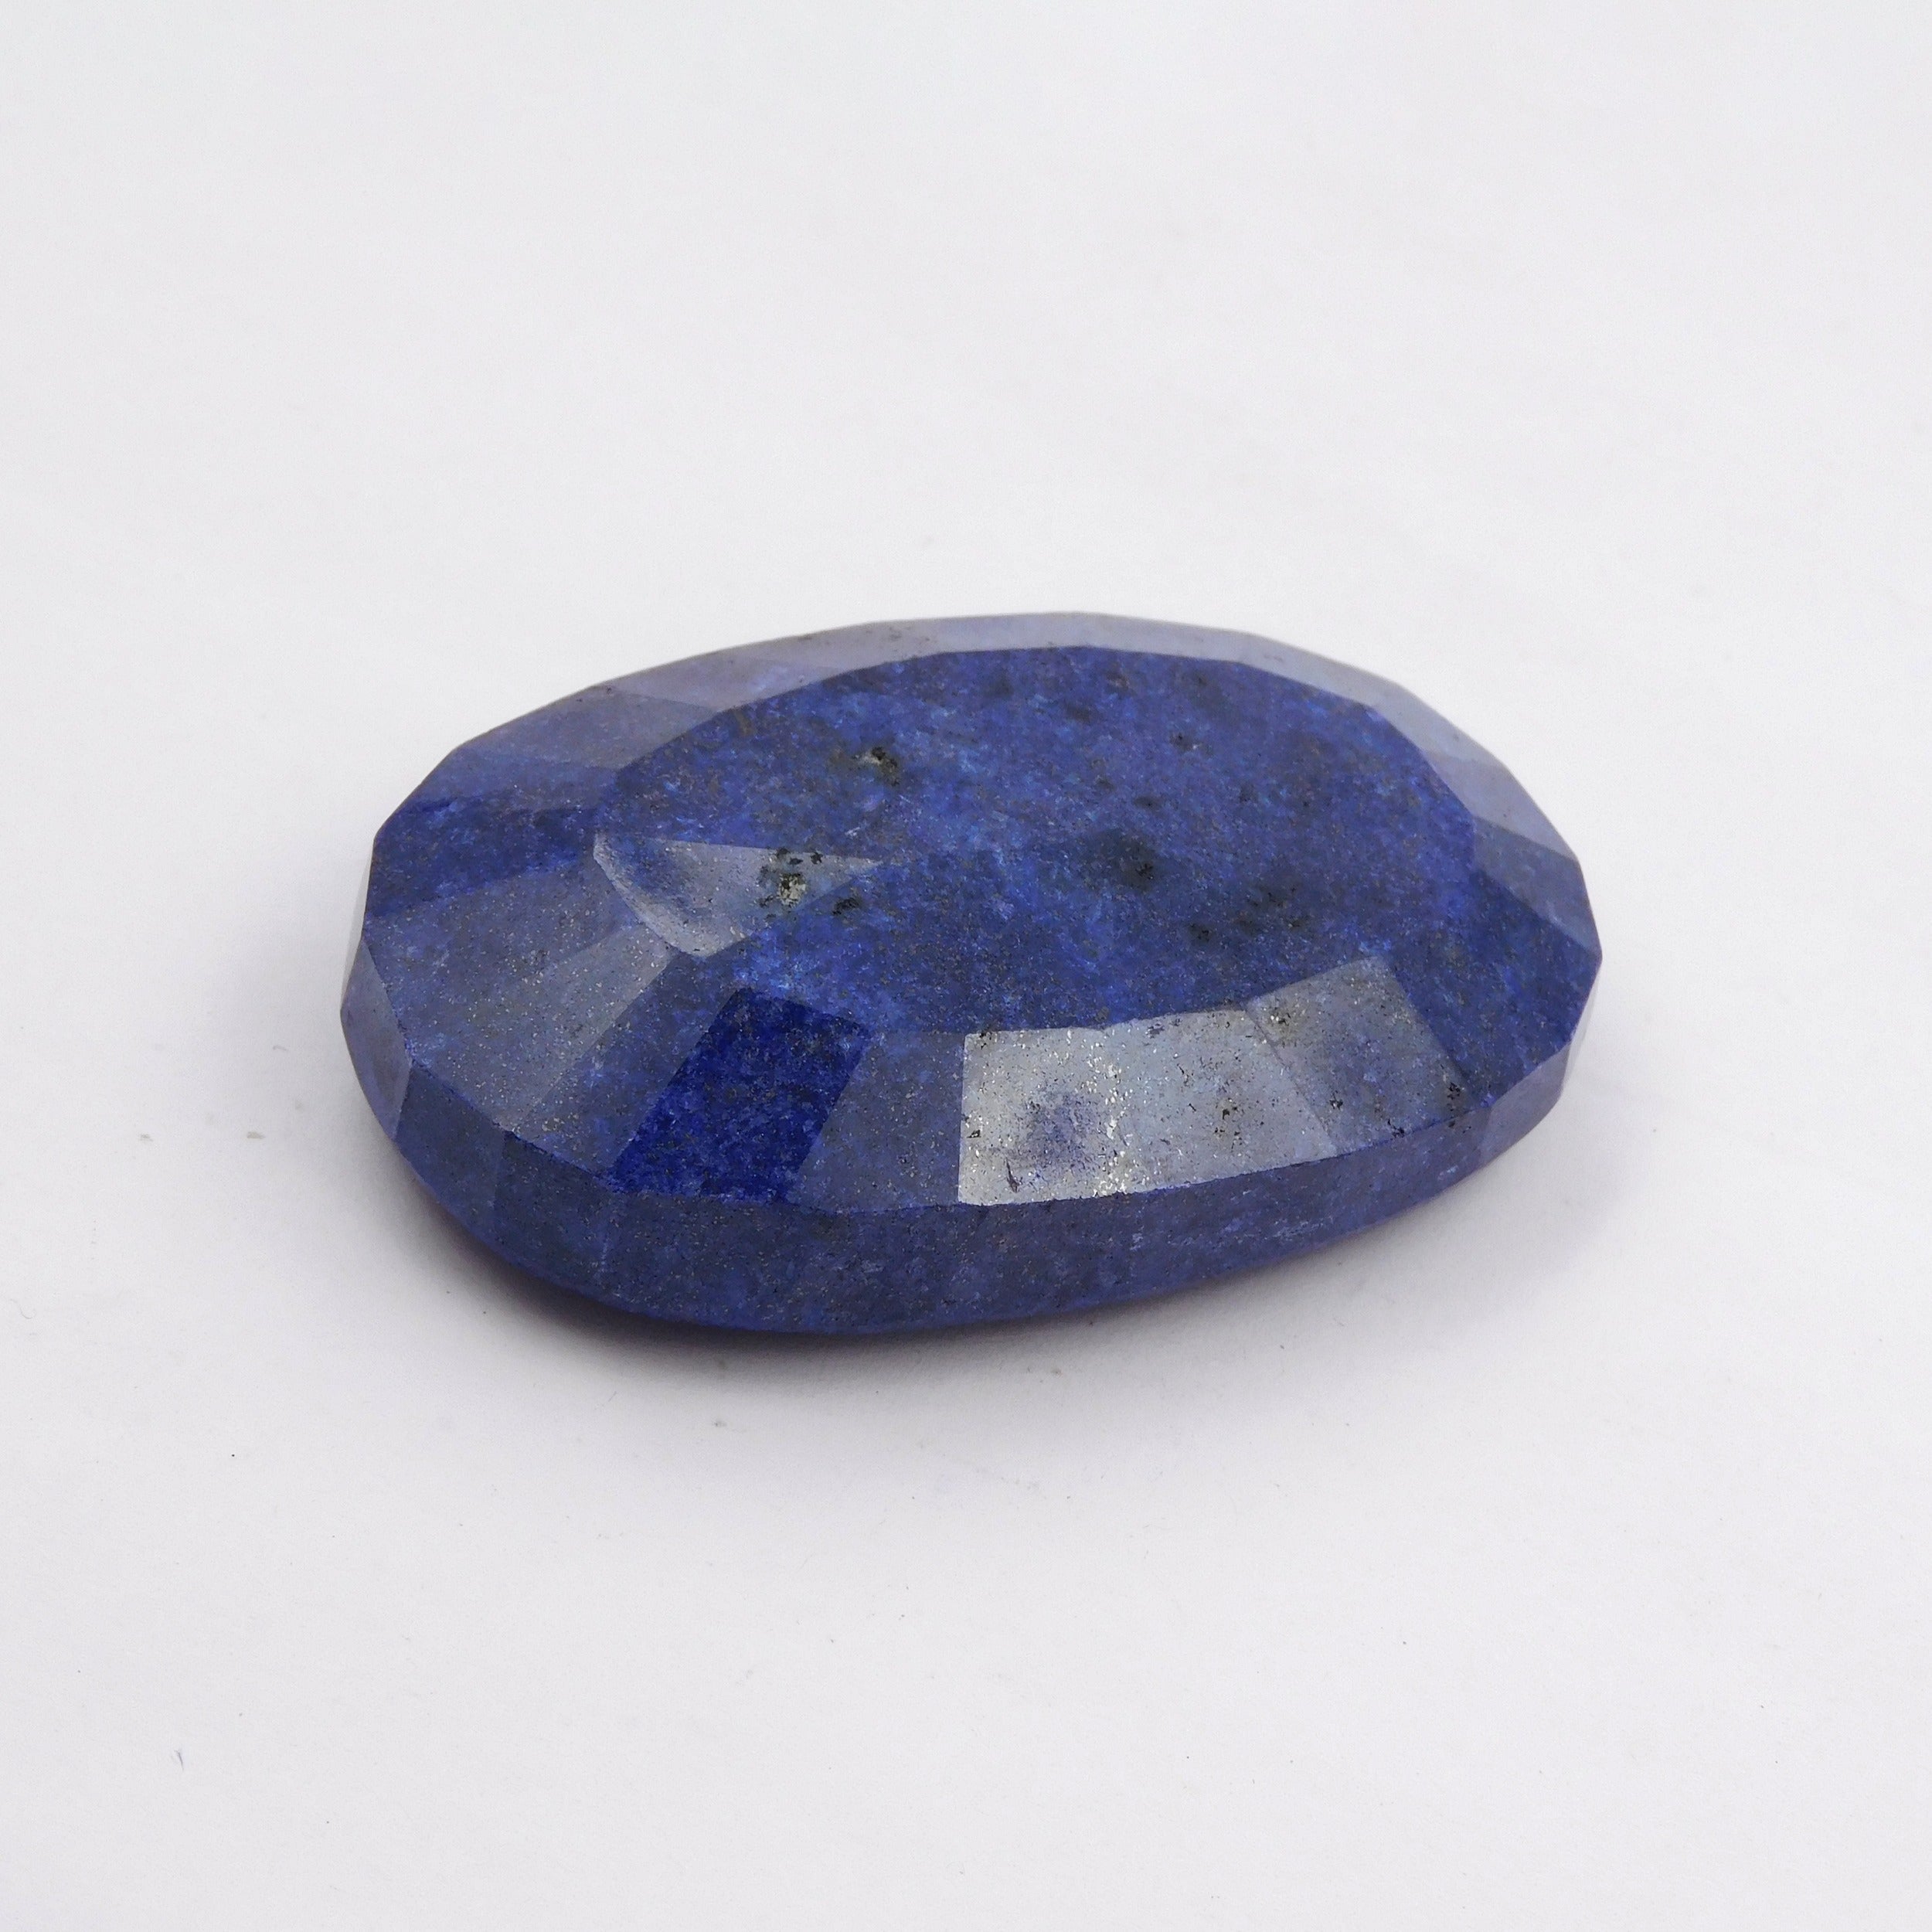 Sapphire Amazing Huge !! 516.05 Carat Certified 100% Natural Blue Sapphire 63x41x16mm Oval Shape From Africa Large Size Loose Gemstone Best For Gift